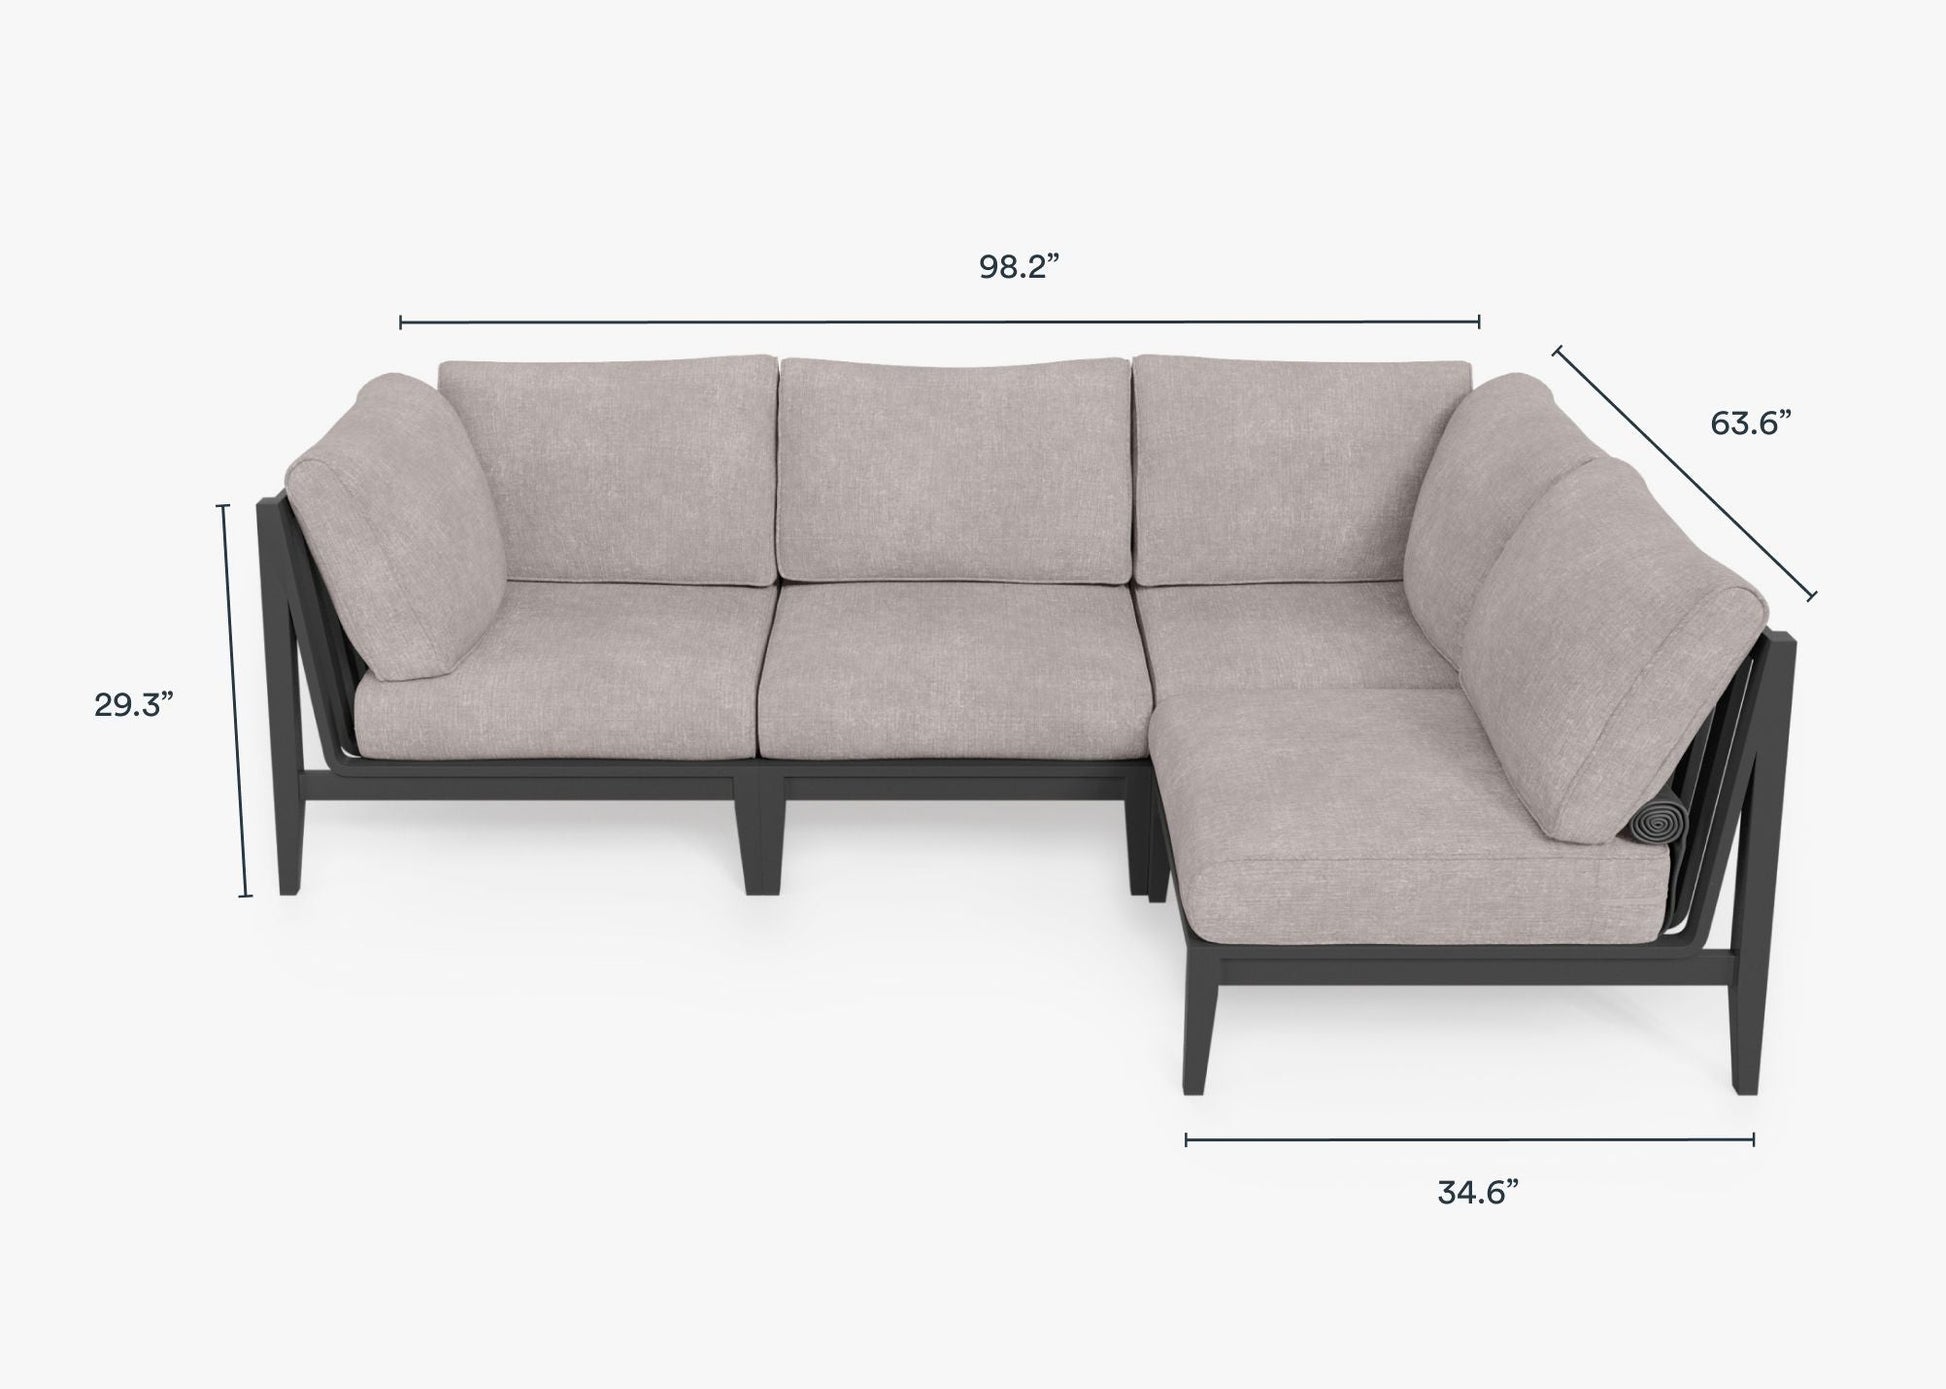 Live Outer 98" x 64" Charcoal Aluminum Outdoor L Shape Sectional 4-Seat With Sandstone Gray Cushion